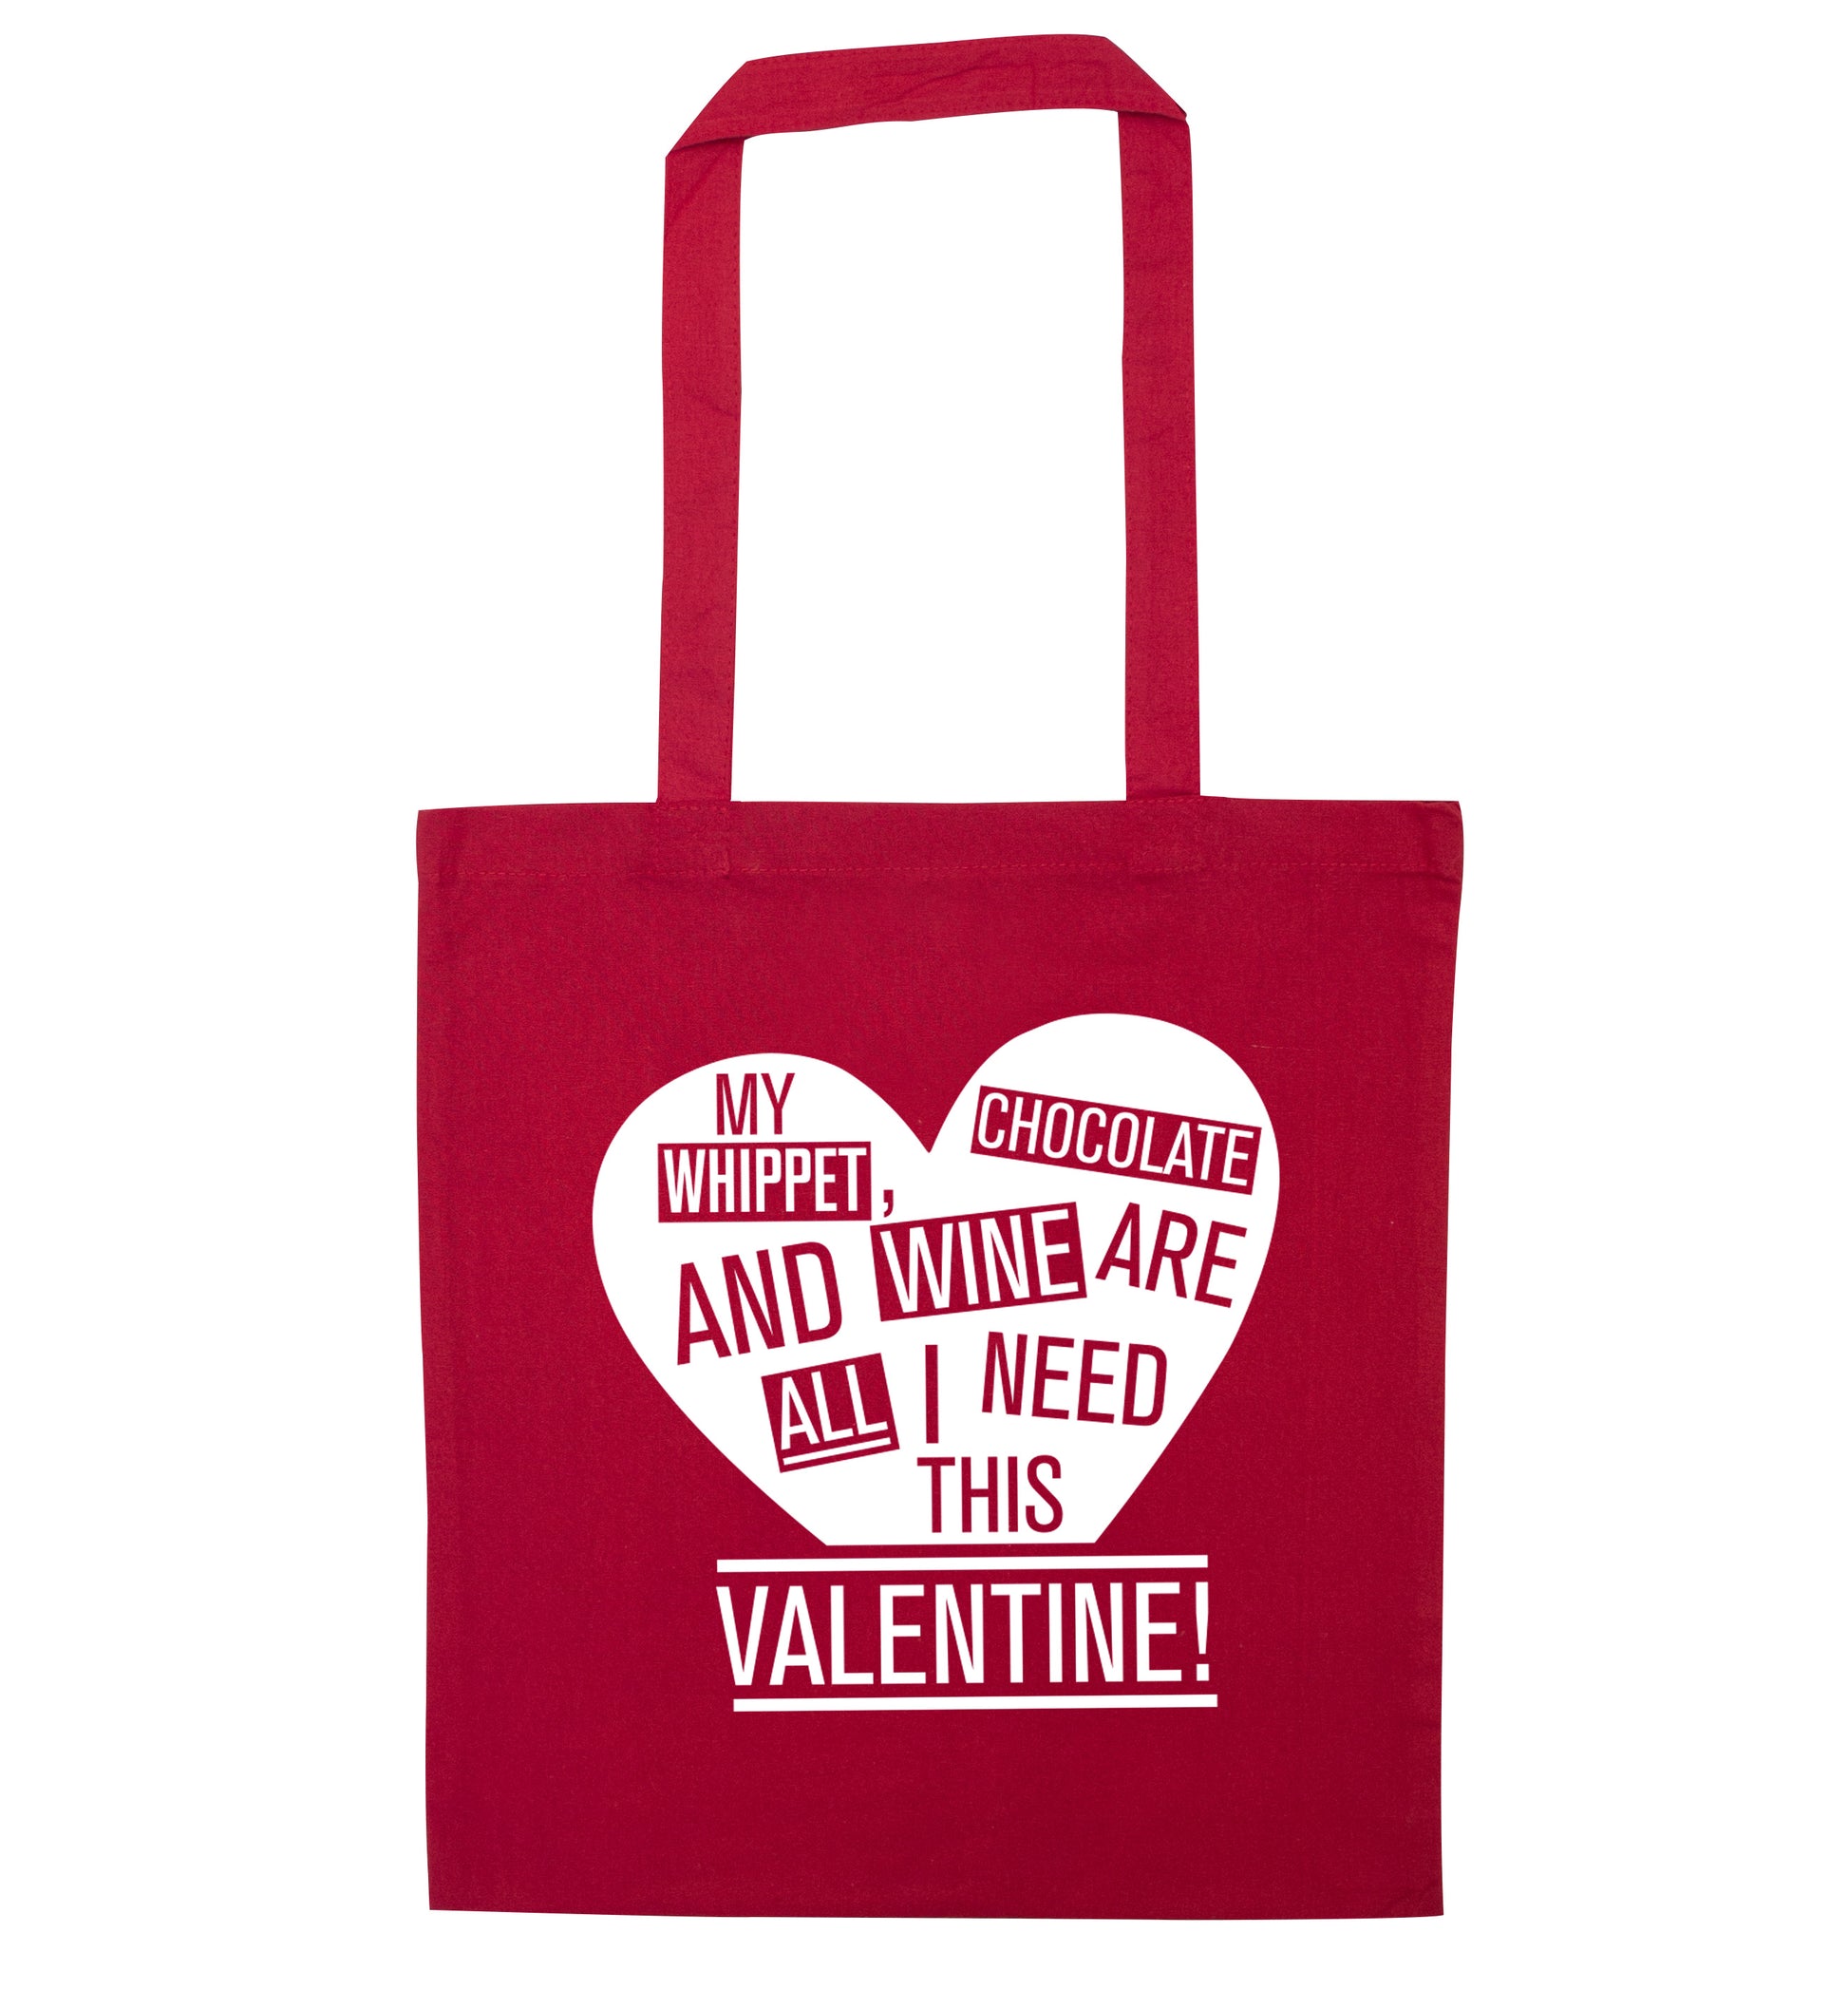 My whippet, chocolate and wine are all I need this valentine! red tote bag